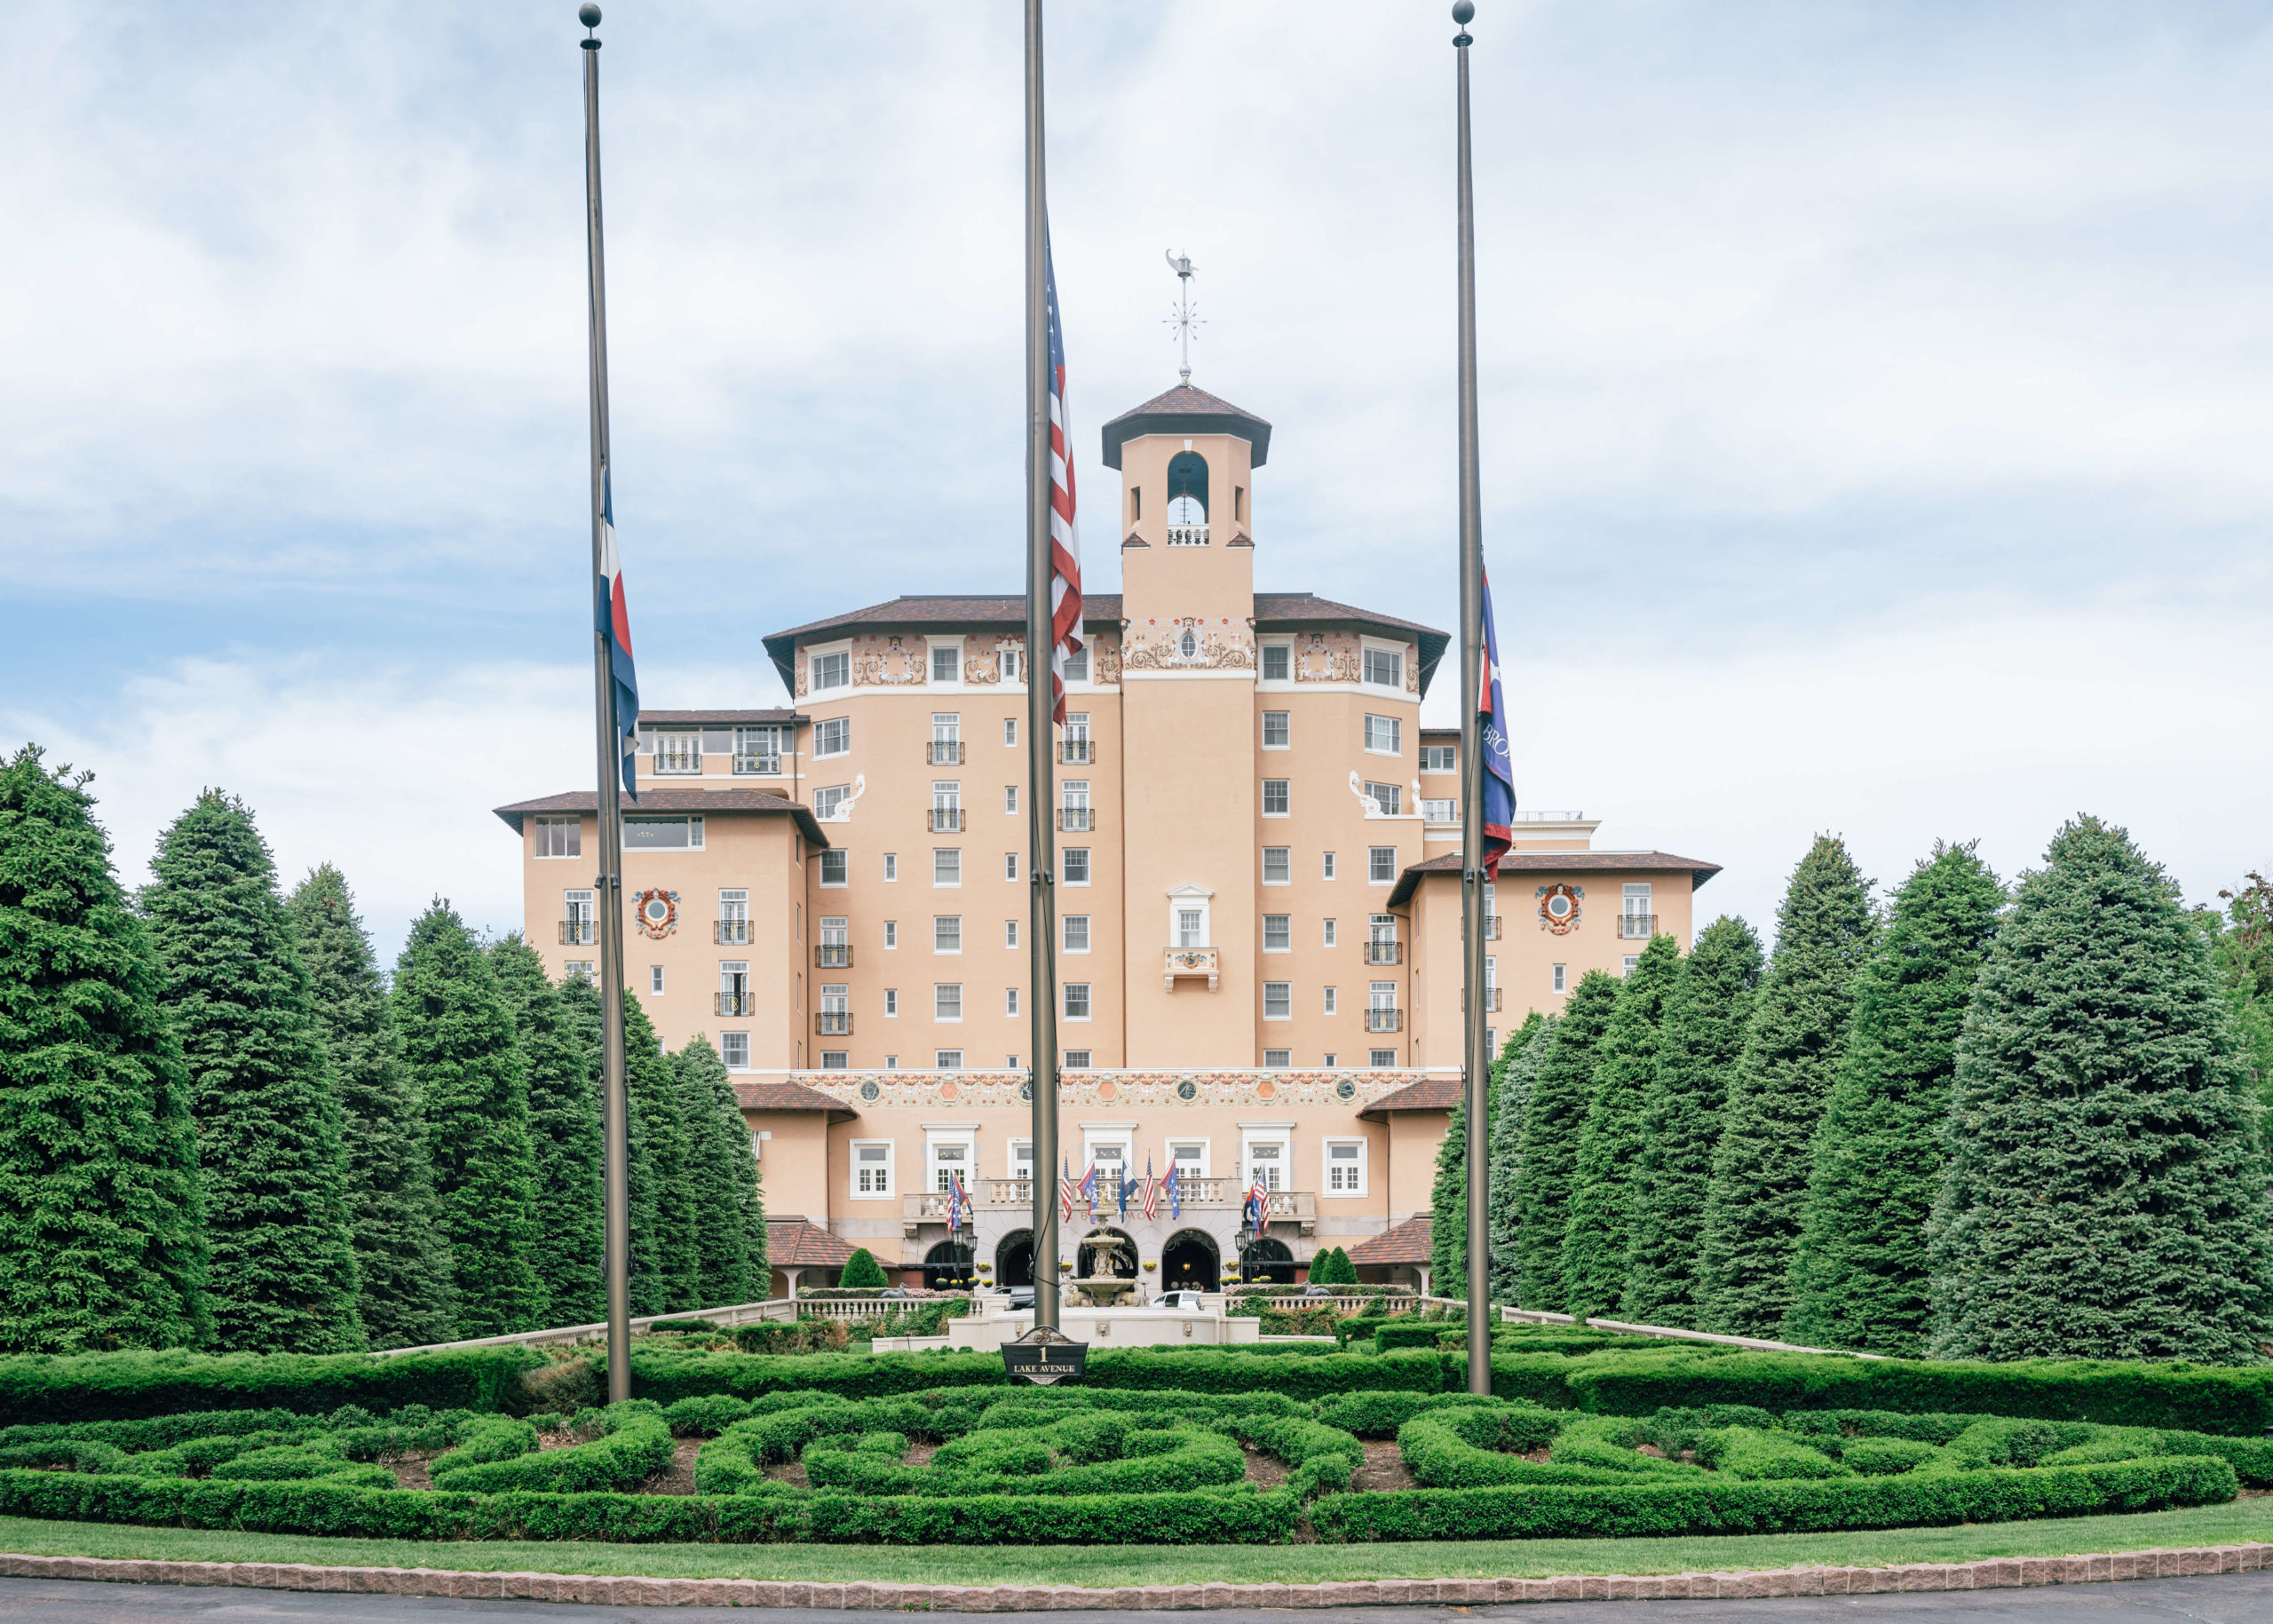 Things to do at the Broadmoor by Erin Winter Photography